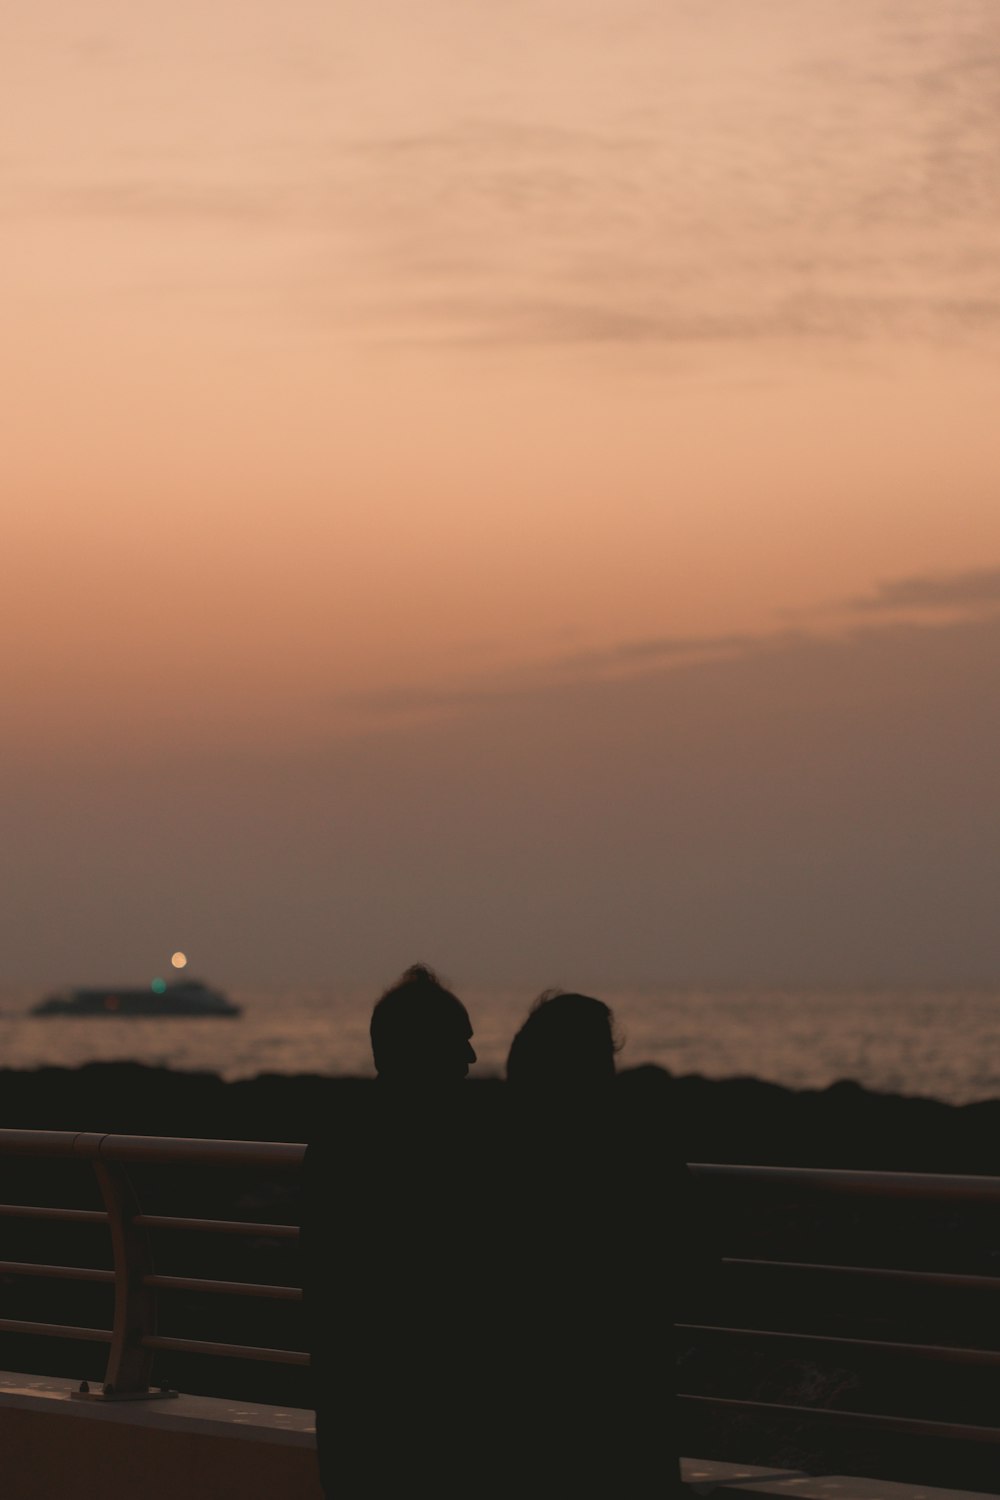 two people sitting on a bench near the ocean